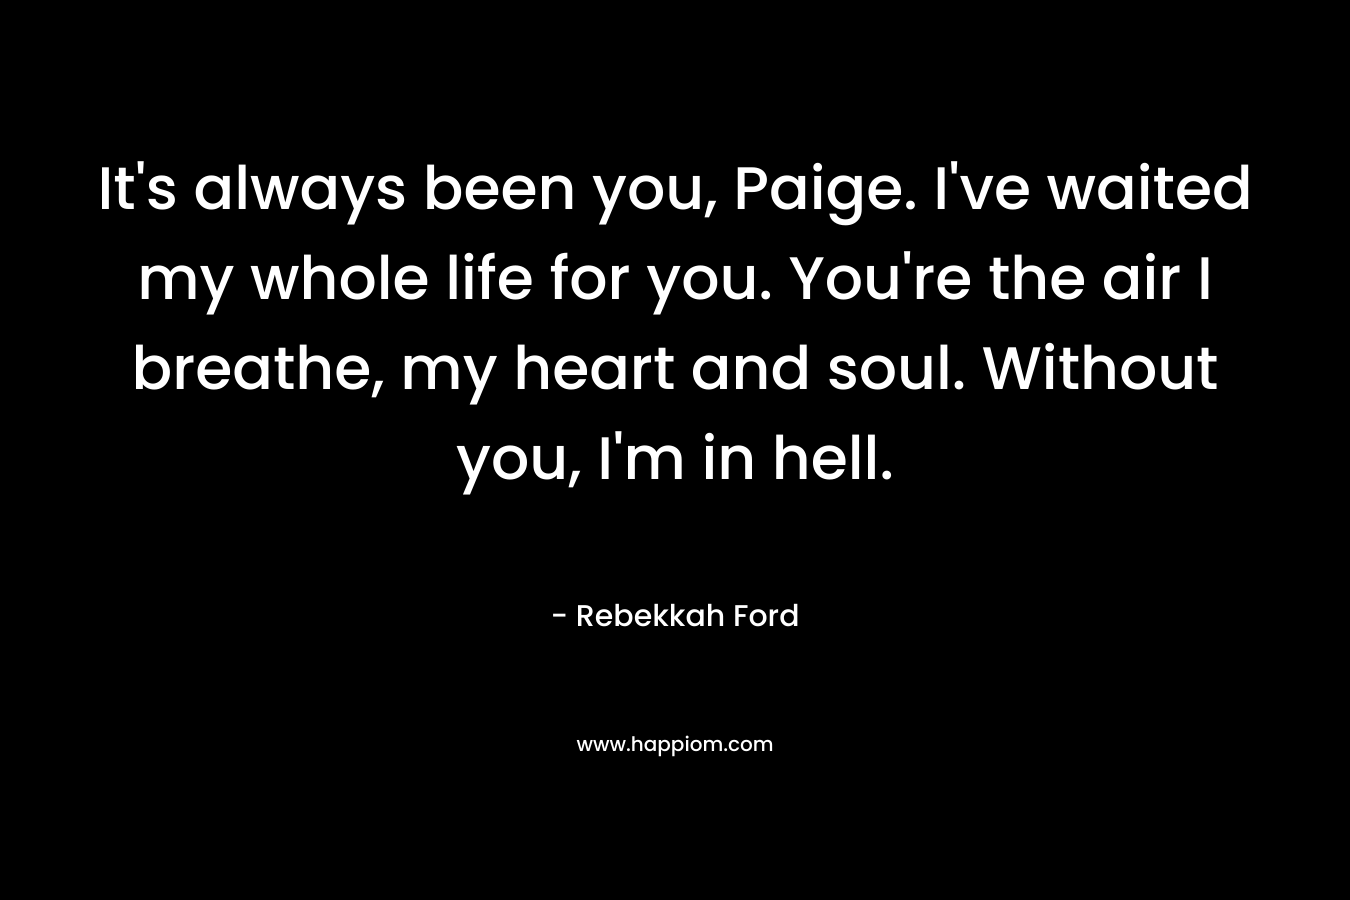 It’s always been you, Paige. I’ve waited my whole life for you. You’re the air I breathe, my heart and soul. Without you, I’m in hell. – Rebekkah Ford